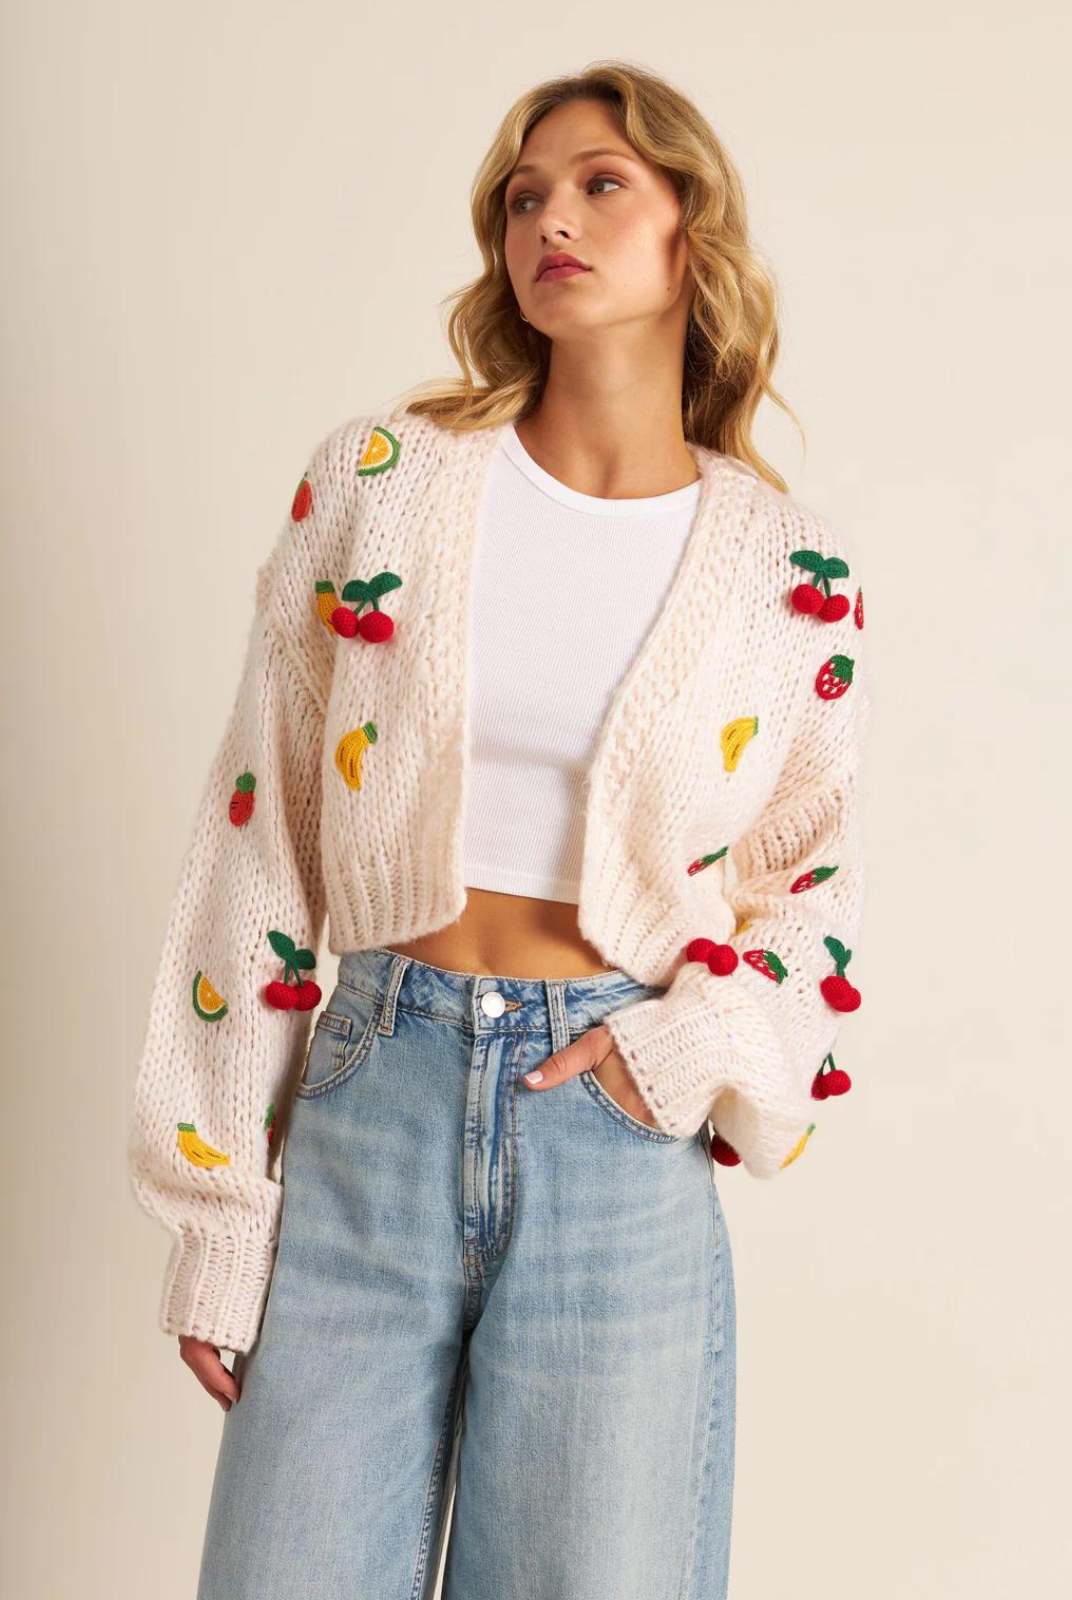 John & Jenn Rio Cardigan- Sunday Market. We don't like to pick favourites, but this open cardigan feels so special and really might be our absolute fav of the season. Stand out with this fruity cutie all season long!